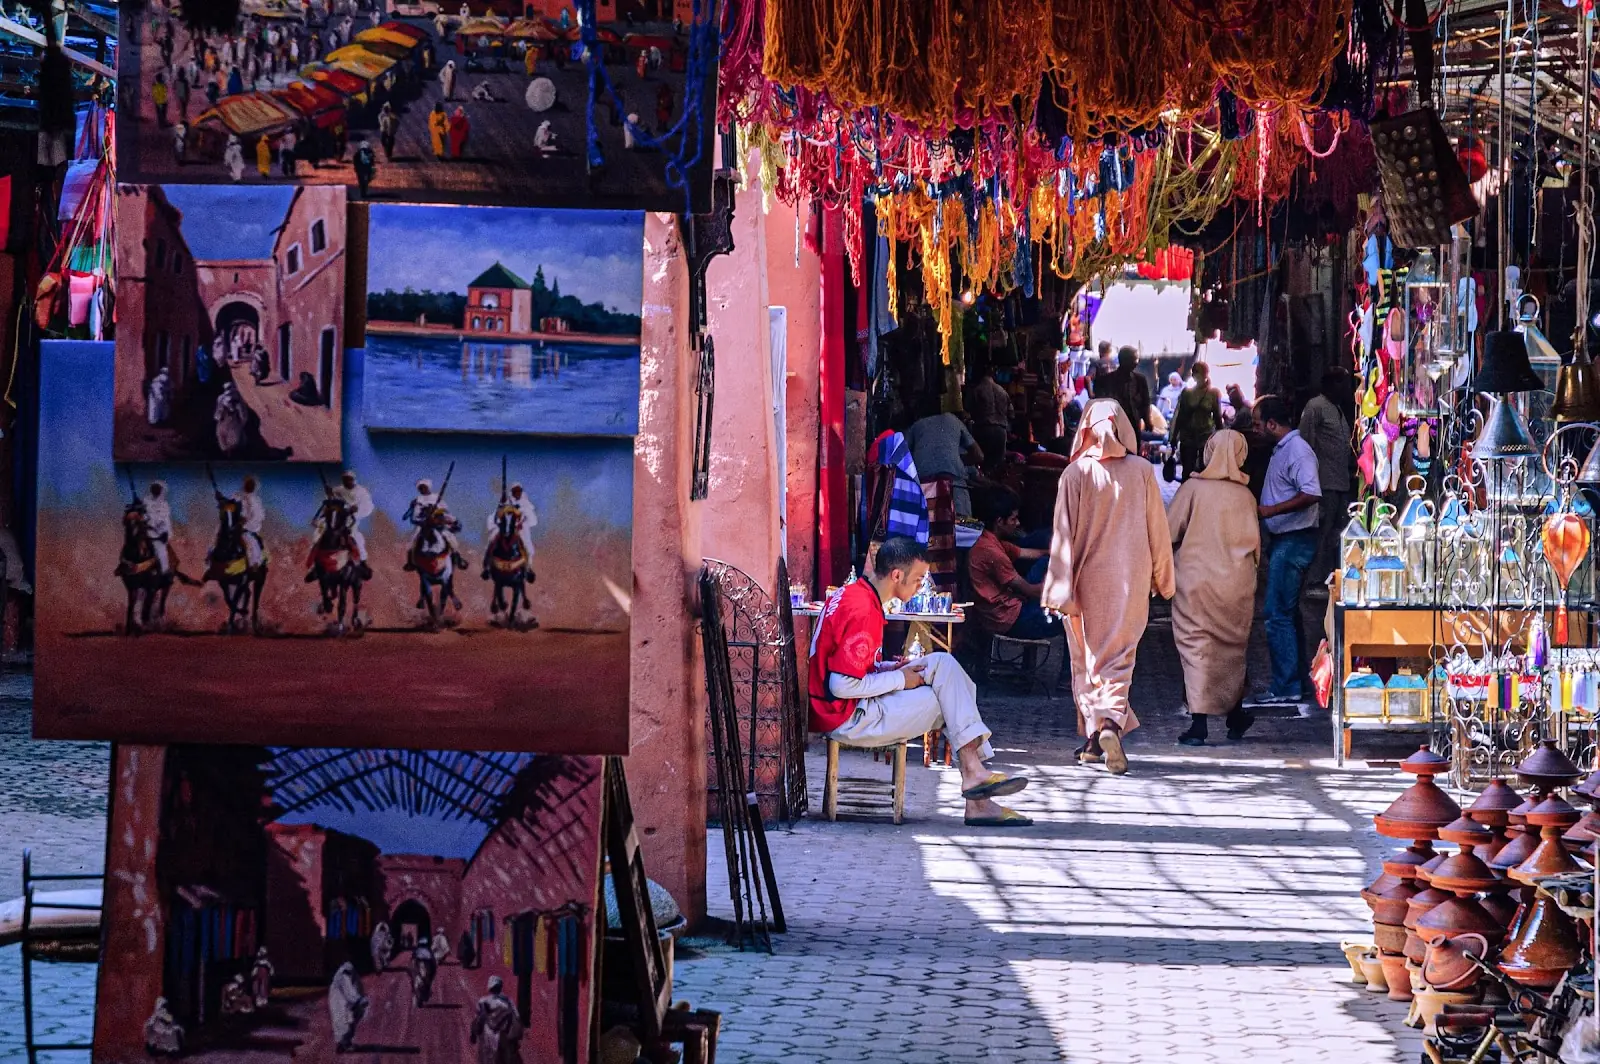 A colourful indoor marketplace in Morocco